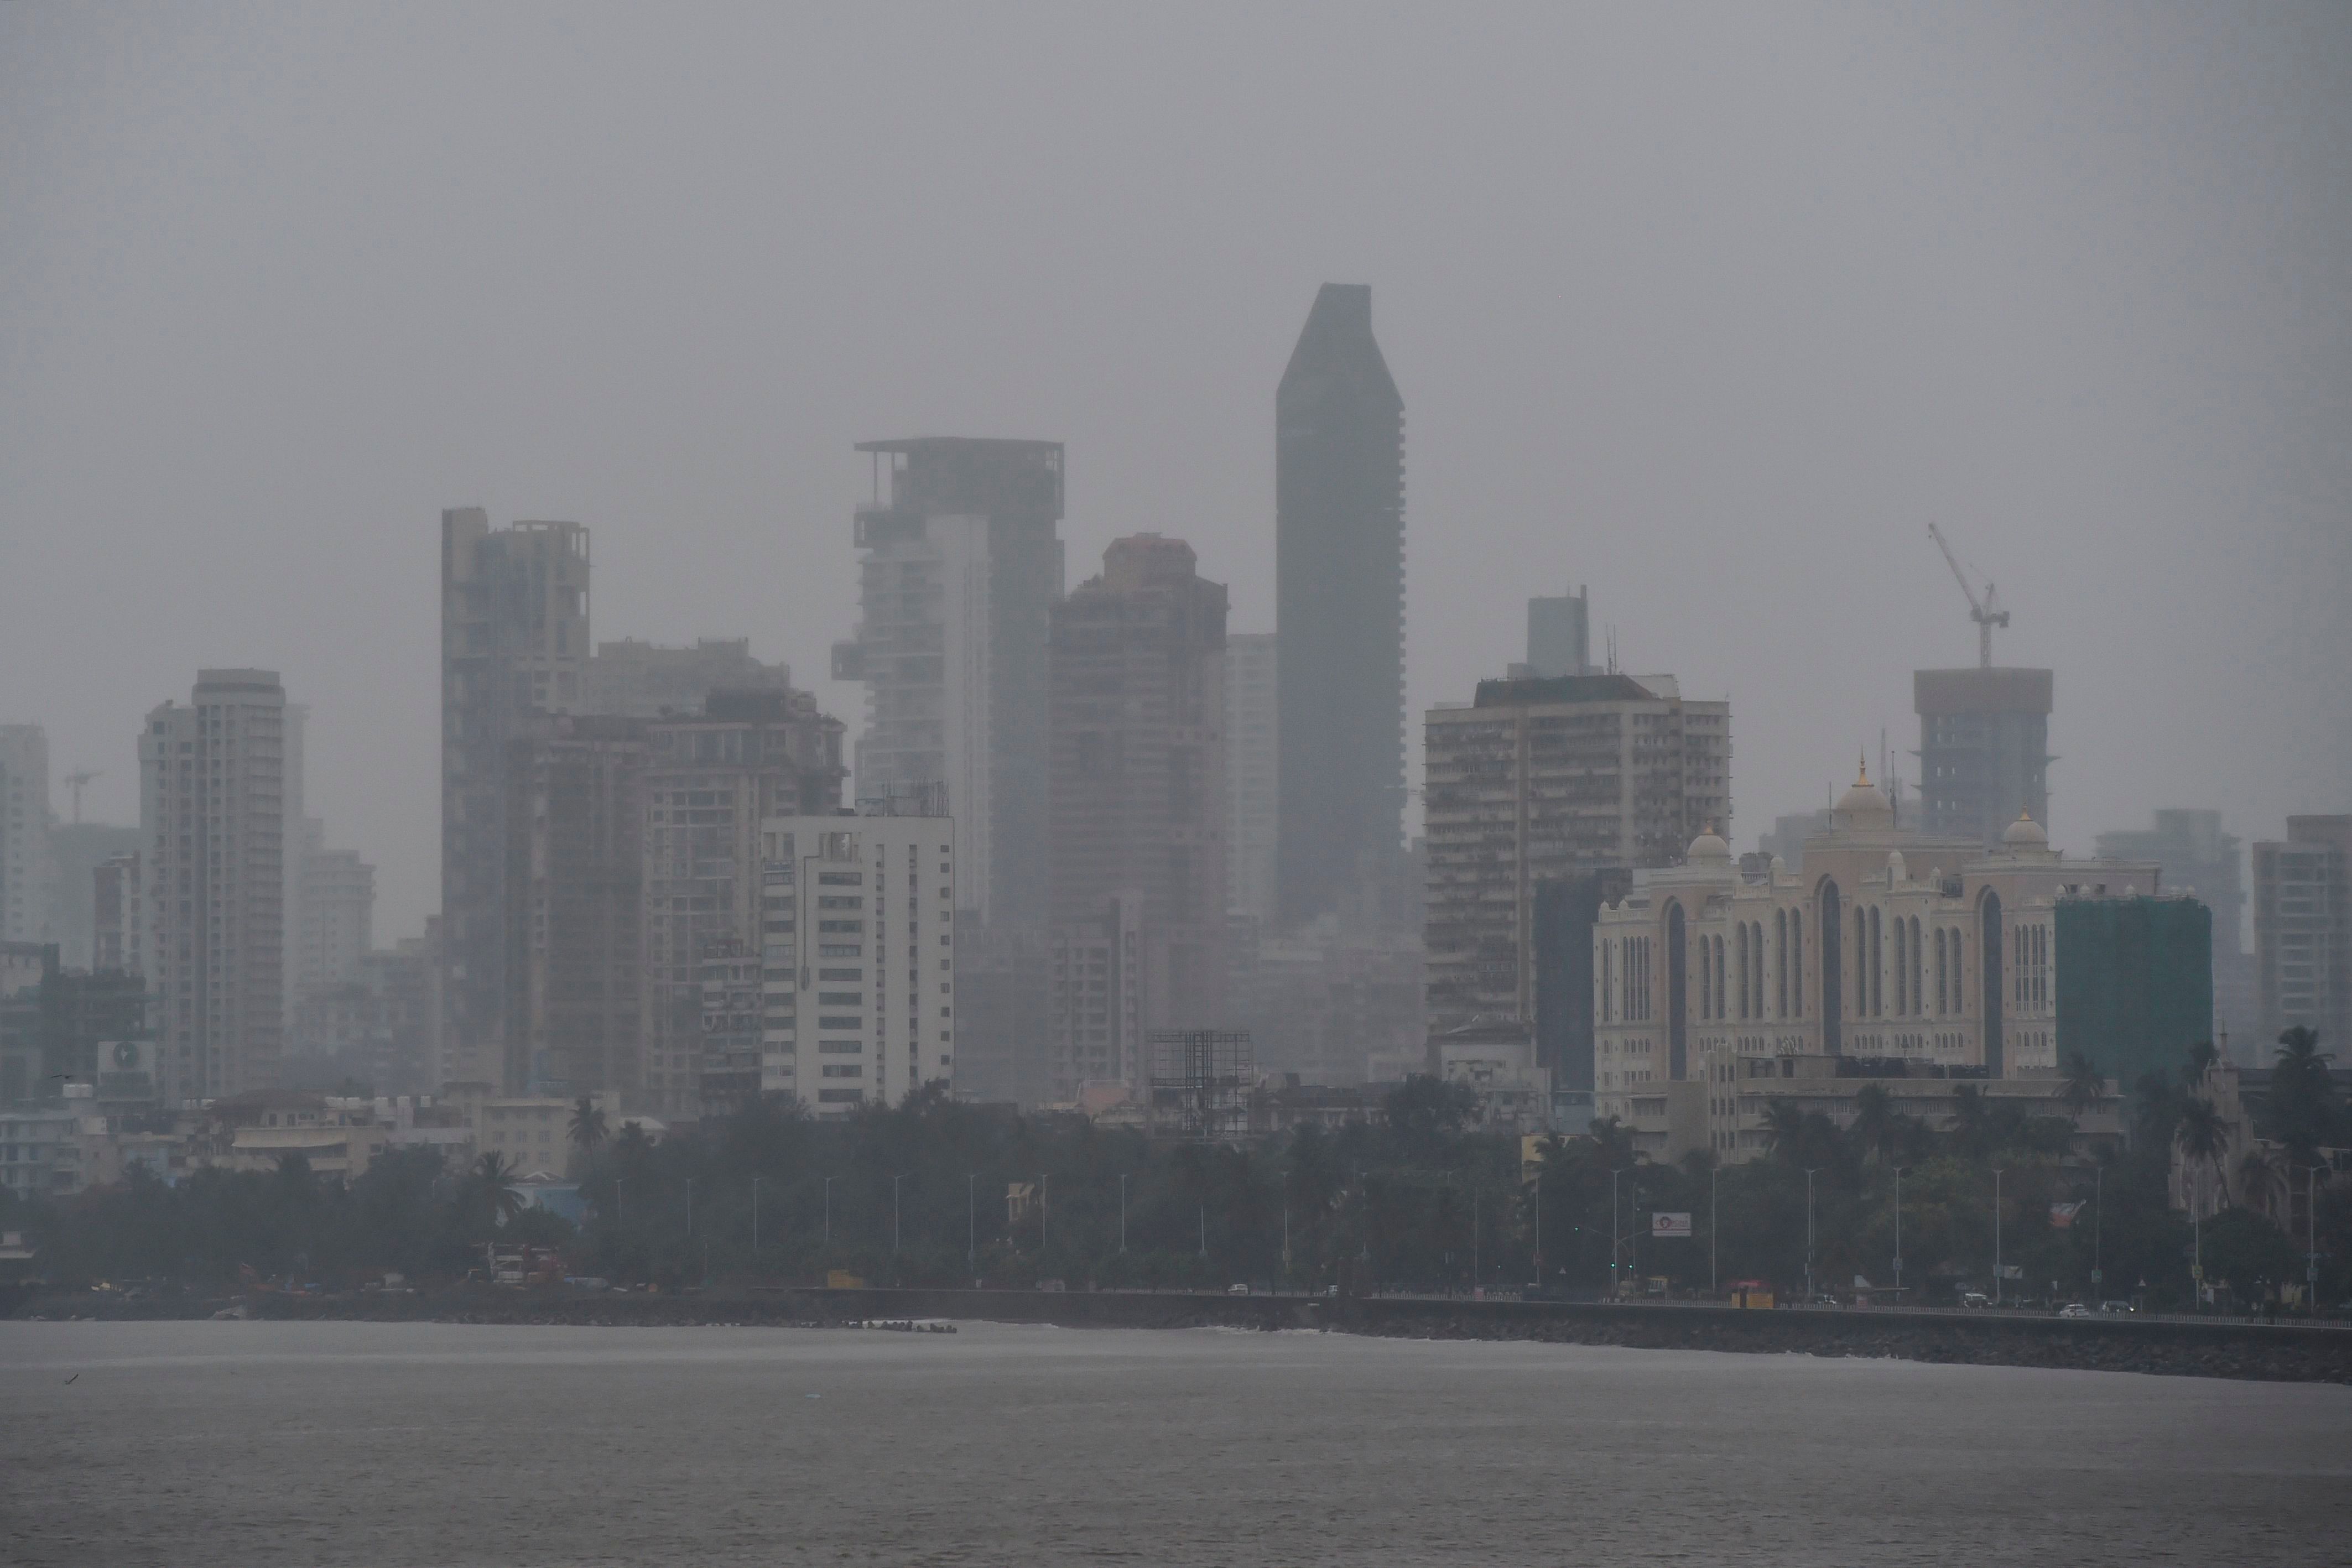 Mumbai authorities shut offices, banned small gatherings and told people to stay home on June 3 as the Indian megacity's first cyclone in more than 70 years approached. Cyclone Nisarga was expected to make landfall near the coastal town of Alibag, around 100 kilometres (60 miles) south of Mumbai, on June 3 afternoon, forecasters said. (Photo by AFP)